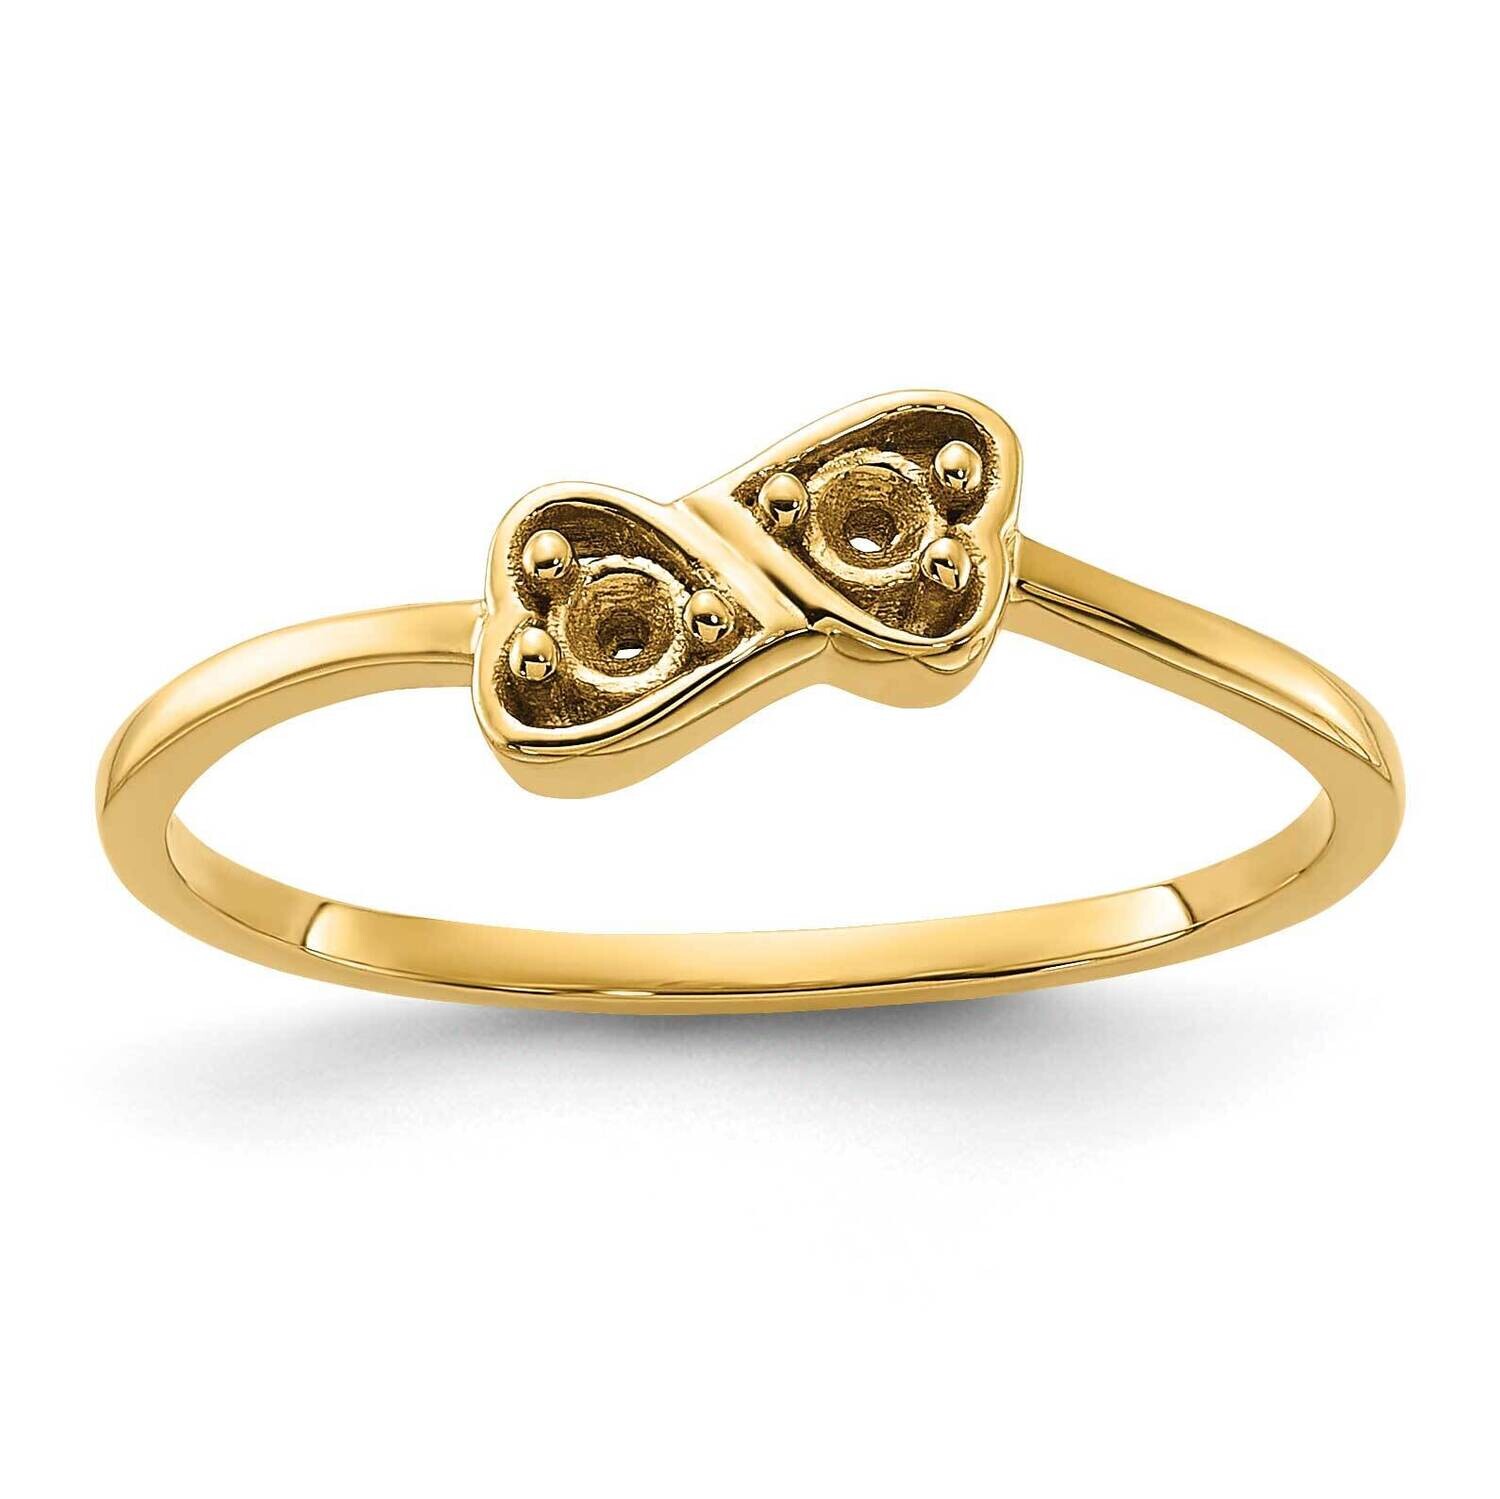 0.05ct. Diamond Heart Ring Mounting 14k Gold Polished Y1792